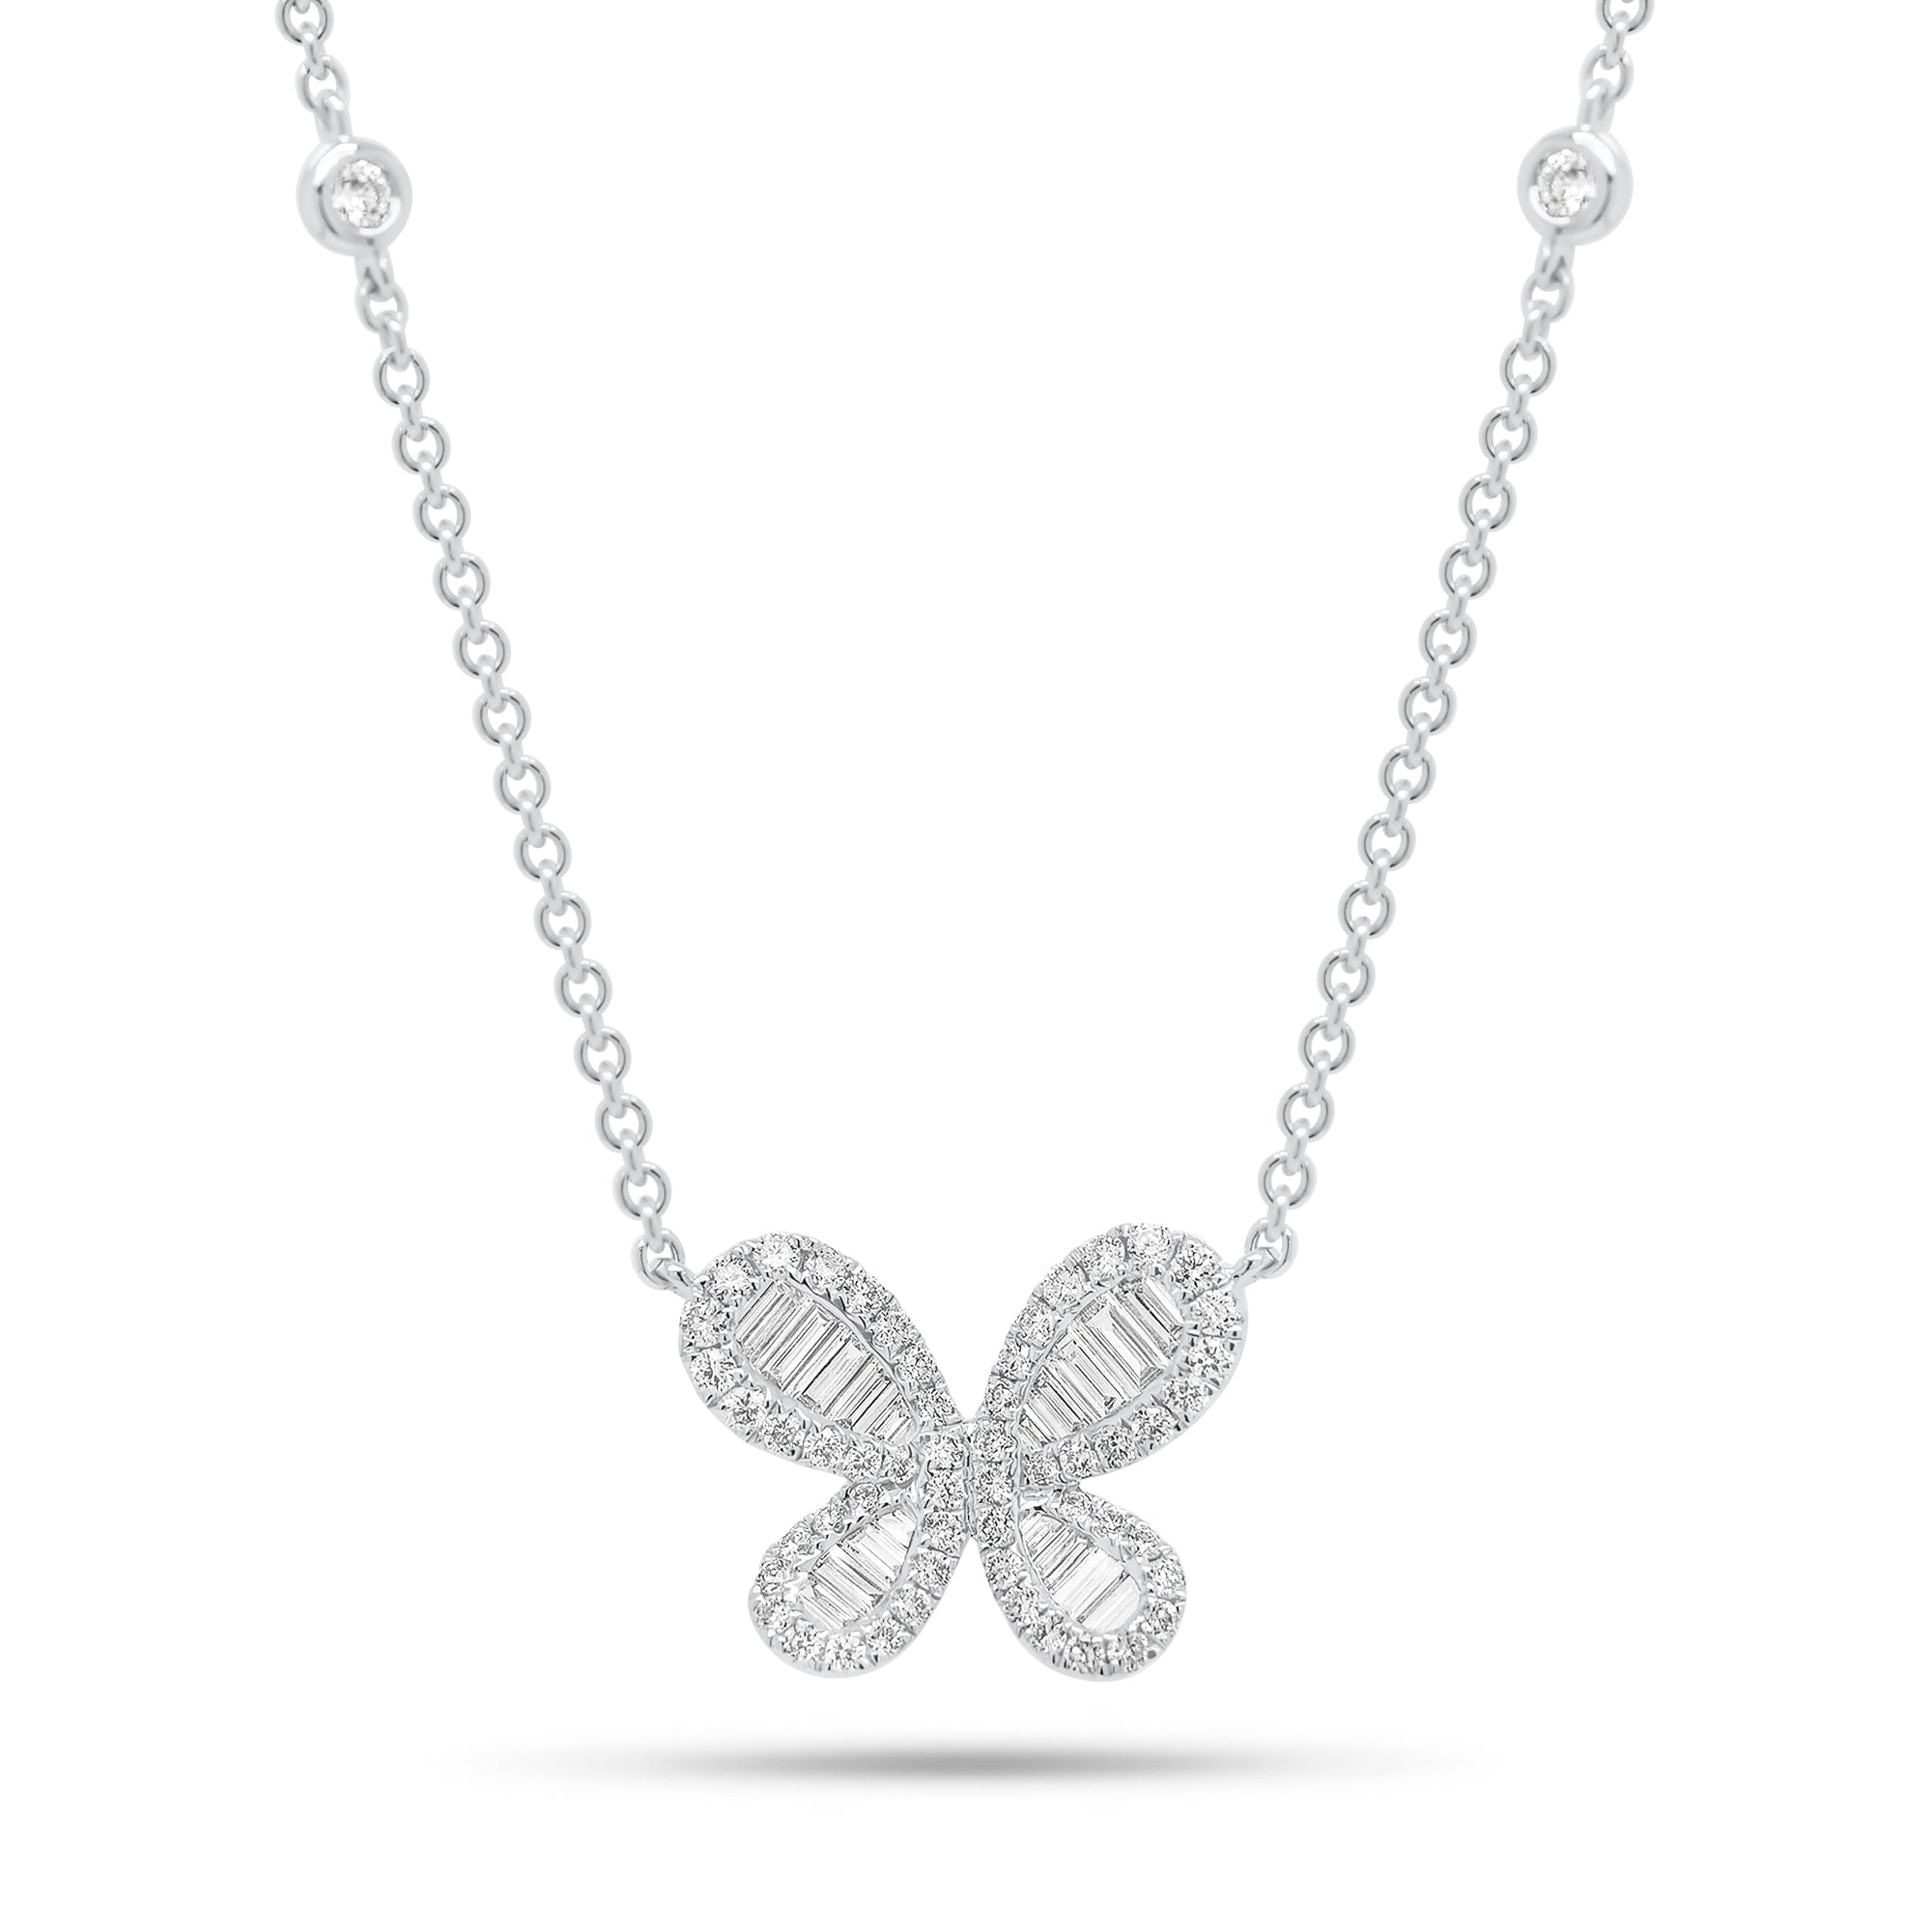 Diamond Butterfly Pendant on Cable Chain With Diamonds - 18K gold weighing 3.96 grams  - 58 round diamonds weighing 0.33 carats  - 18 slim baguettes weighing 0.24 carats